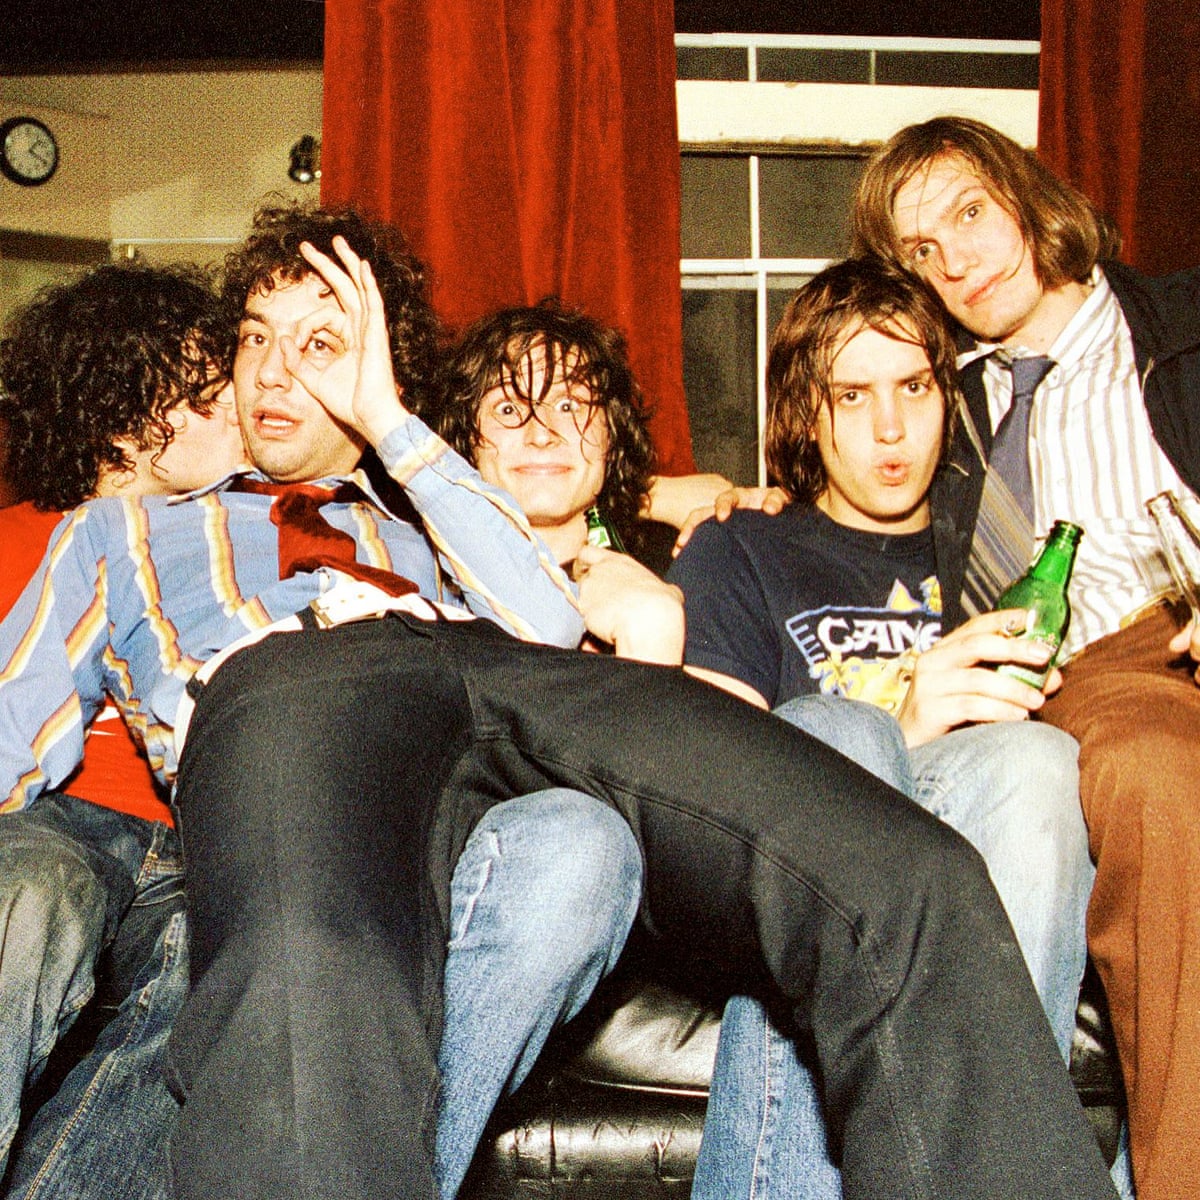 Out Stroked: How “Under Cover Of Darkness” by “The Strokes